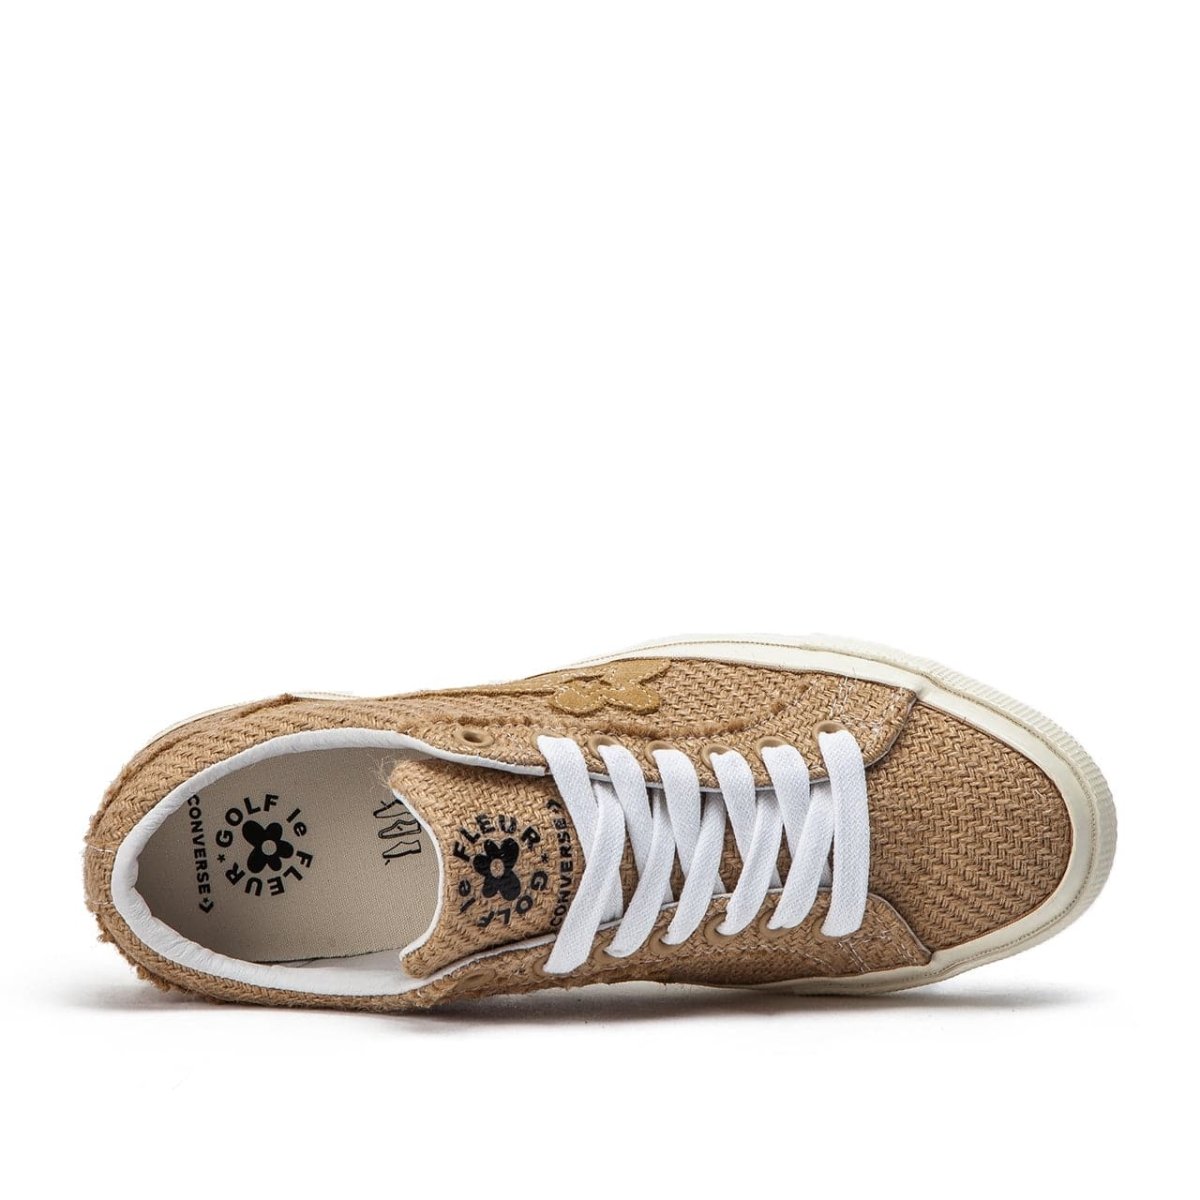 Converse x Golf Le Fleur One Star OX (Curry / Curry / Beige)  - Allike Store